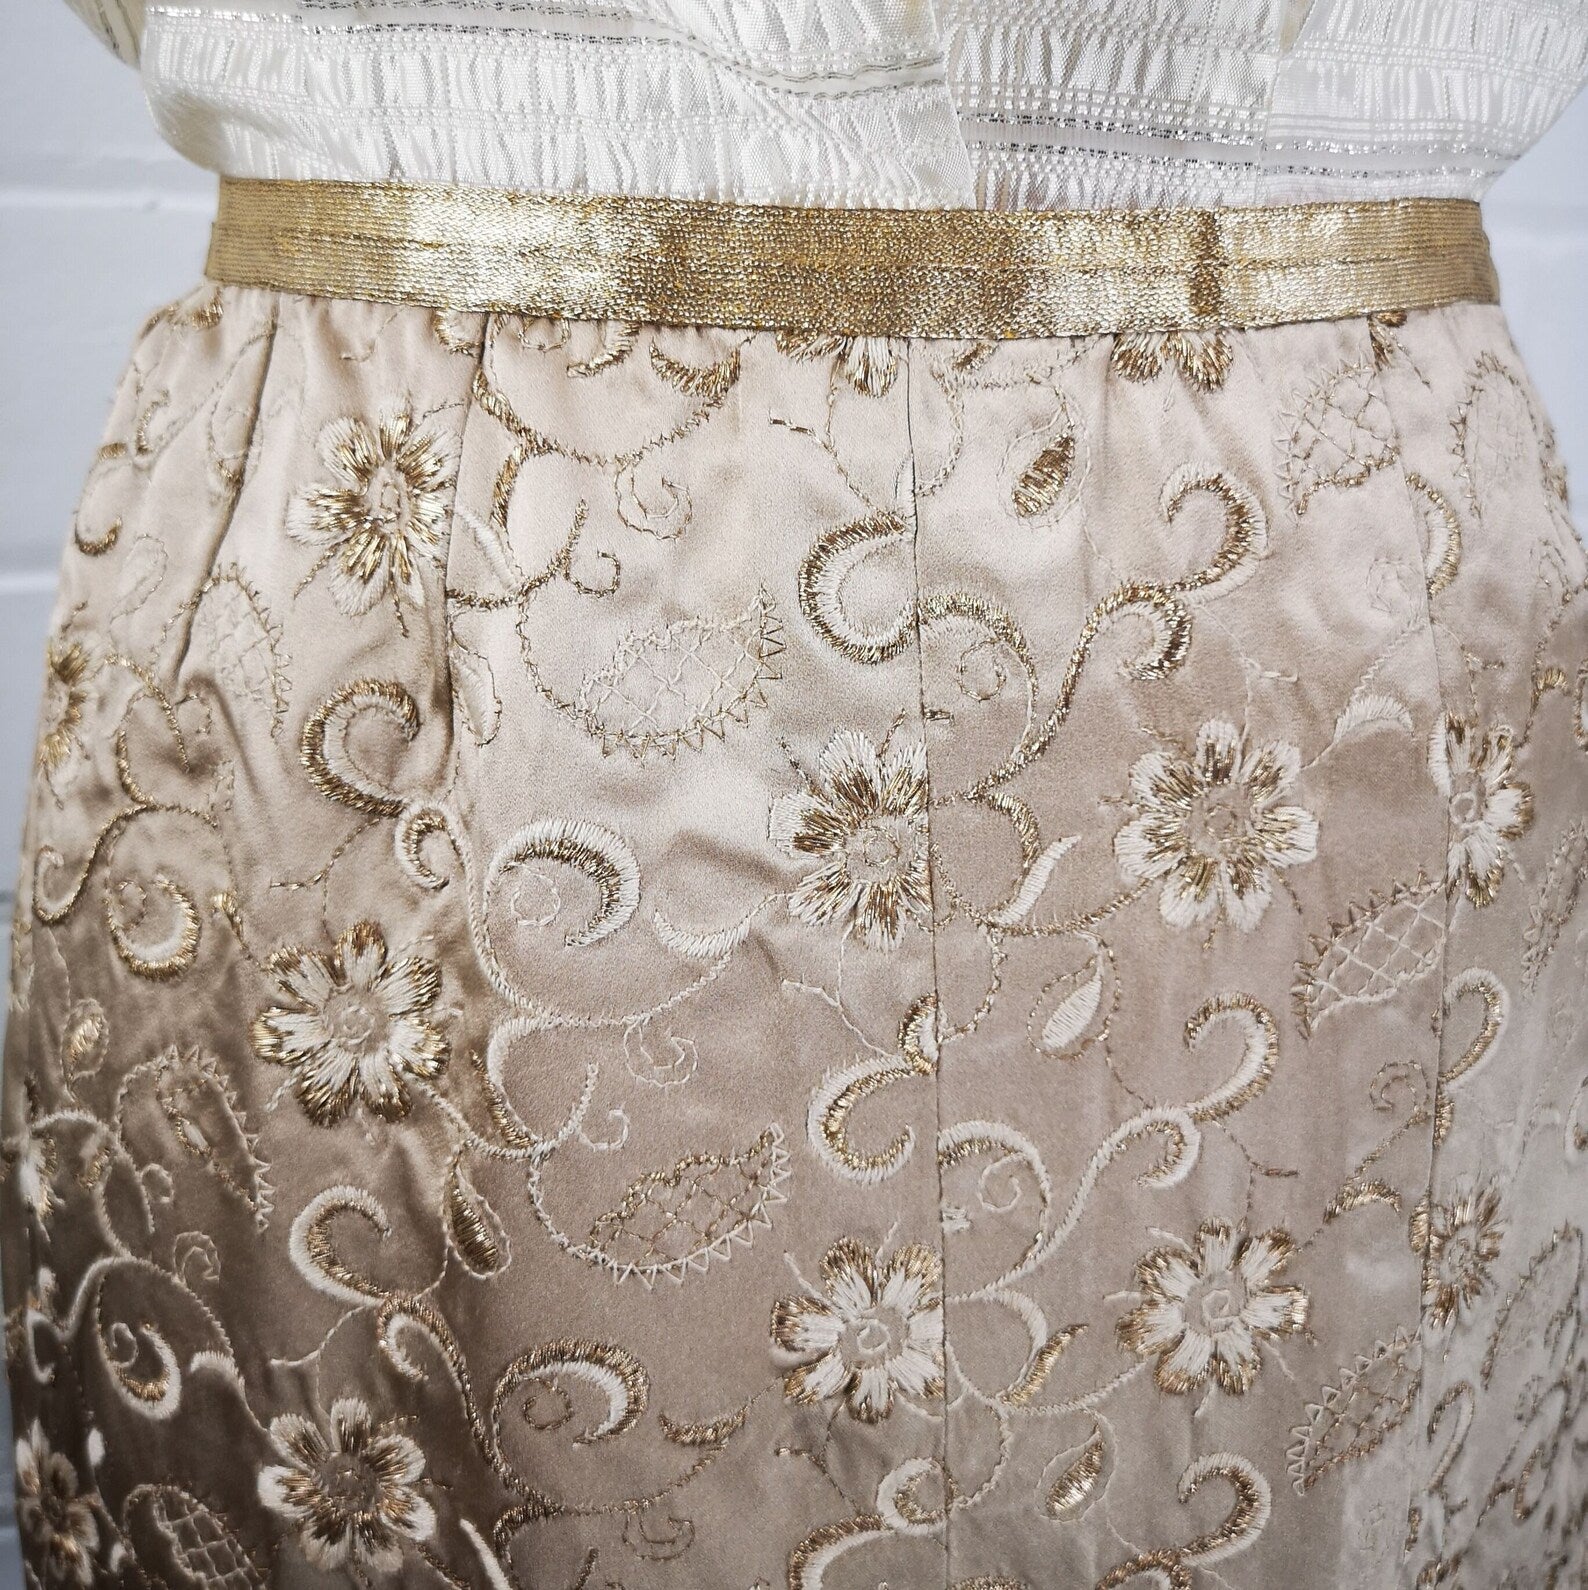 Vintage 1960s Champagne Gold Metallic Floral Embroidered Silk Pencil Skirt